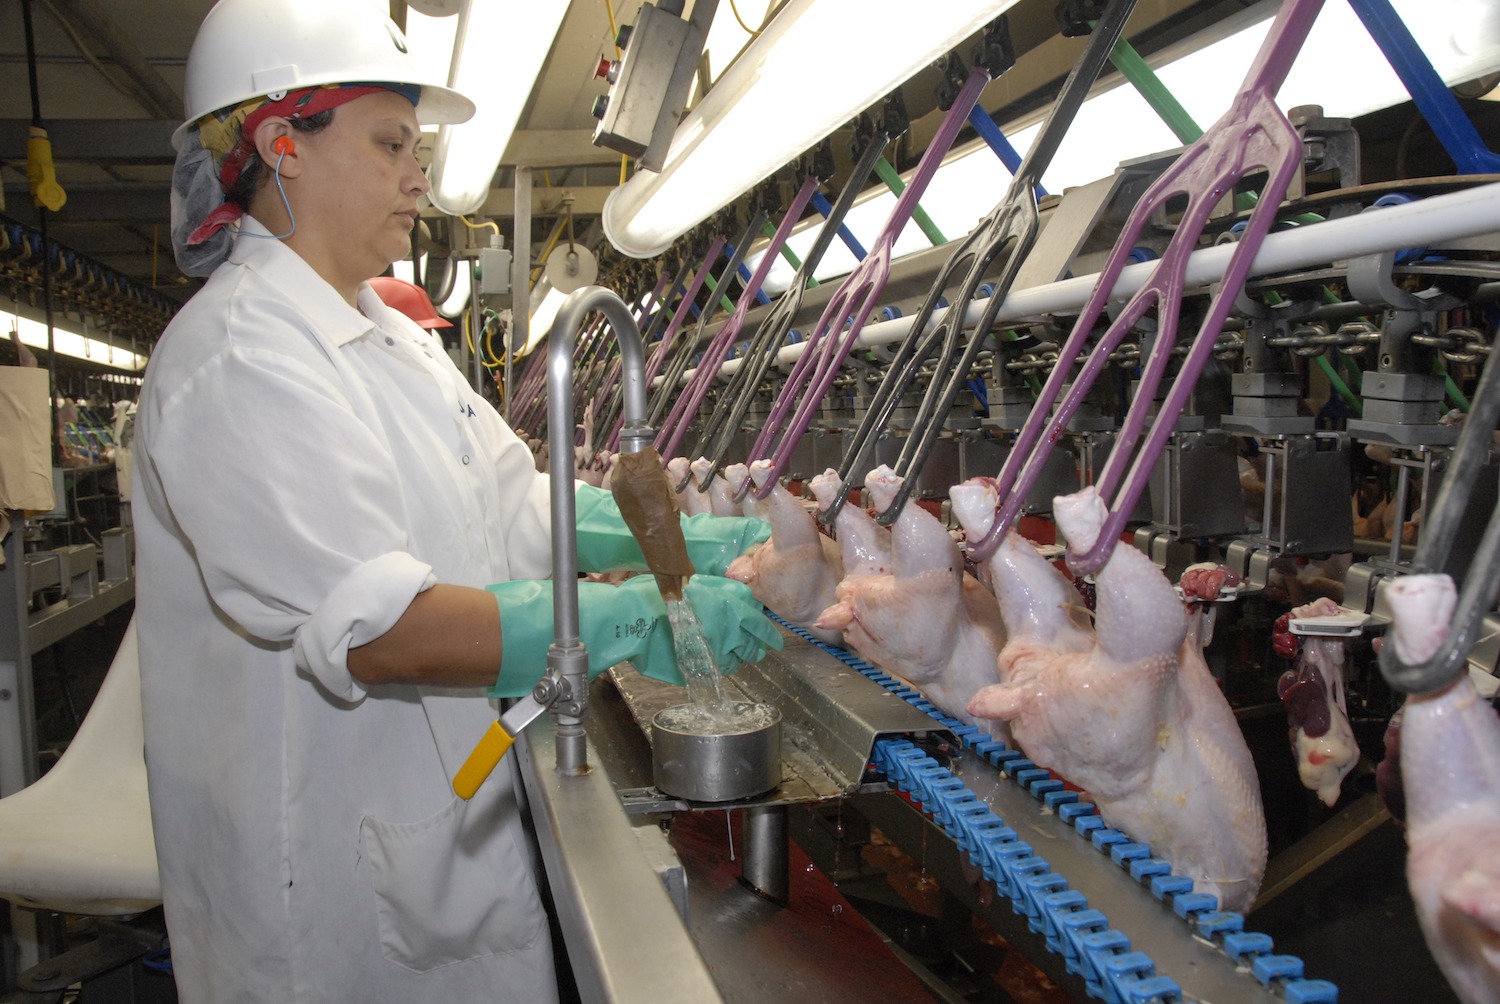 Line speeds poultry slaughterhouse in Nixon Texas inspected by USDA worker April 2020